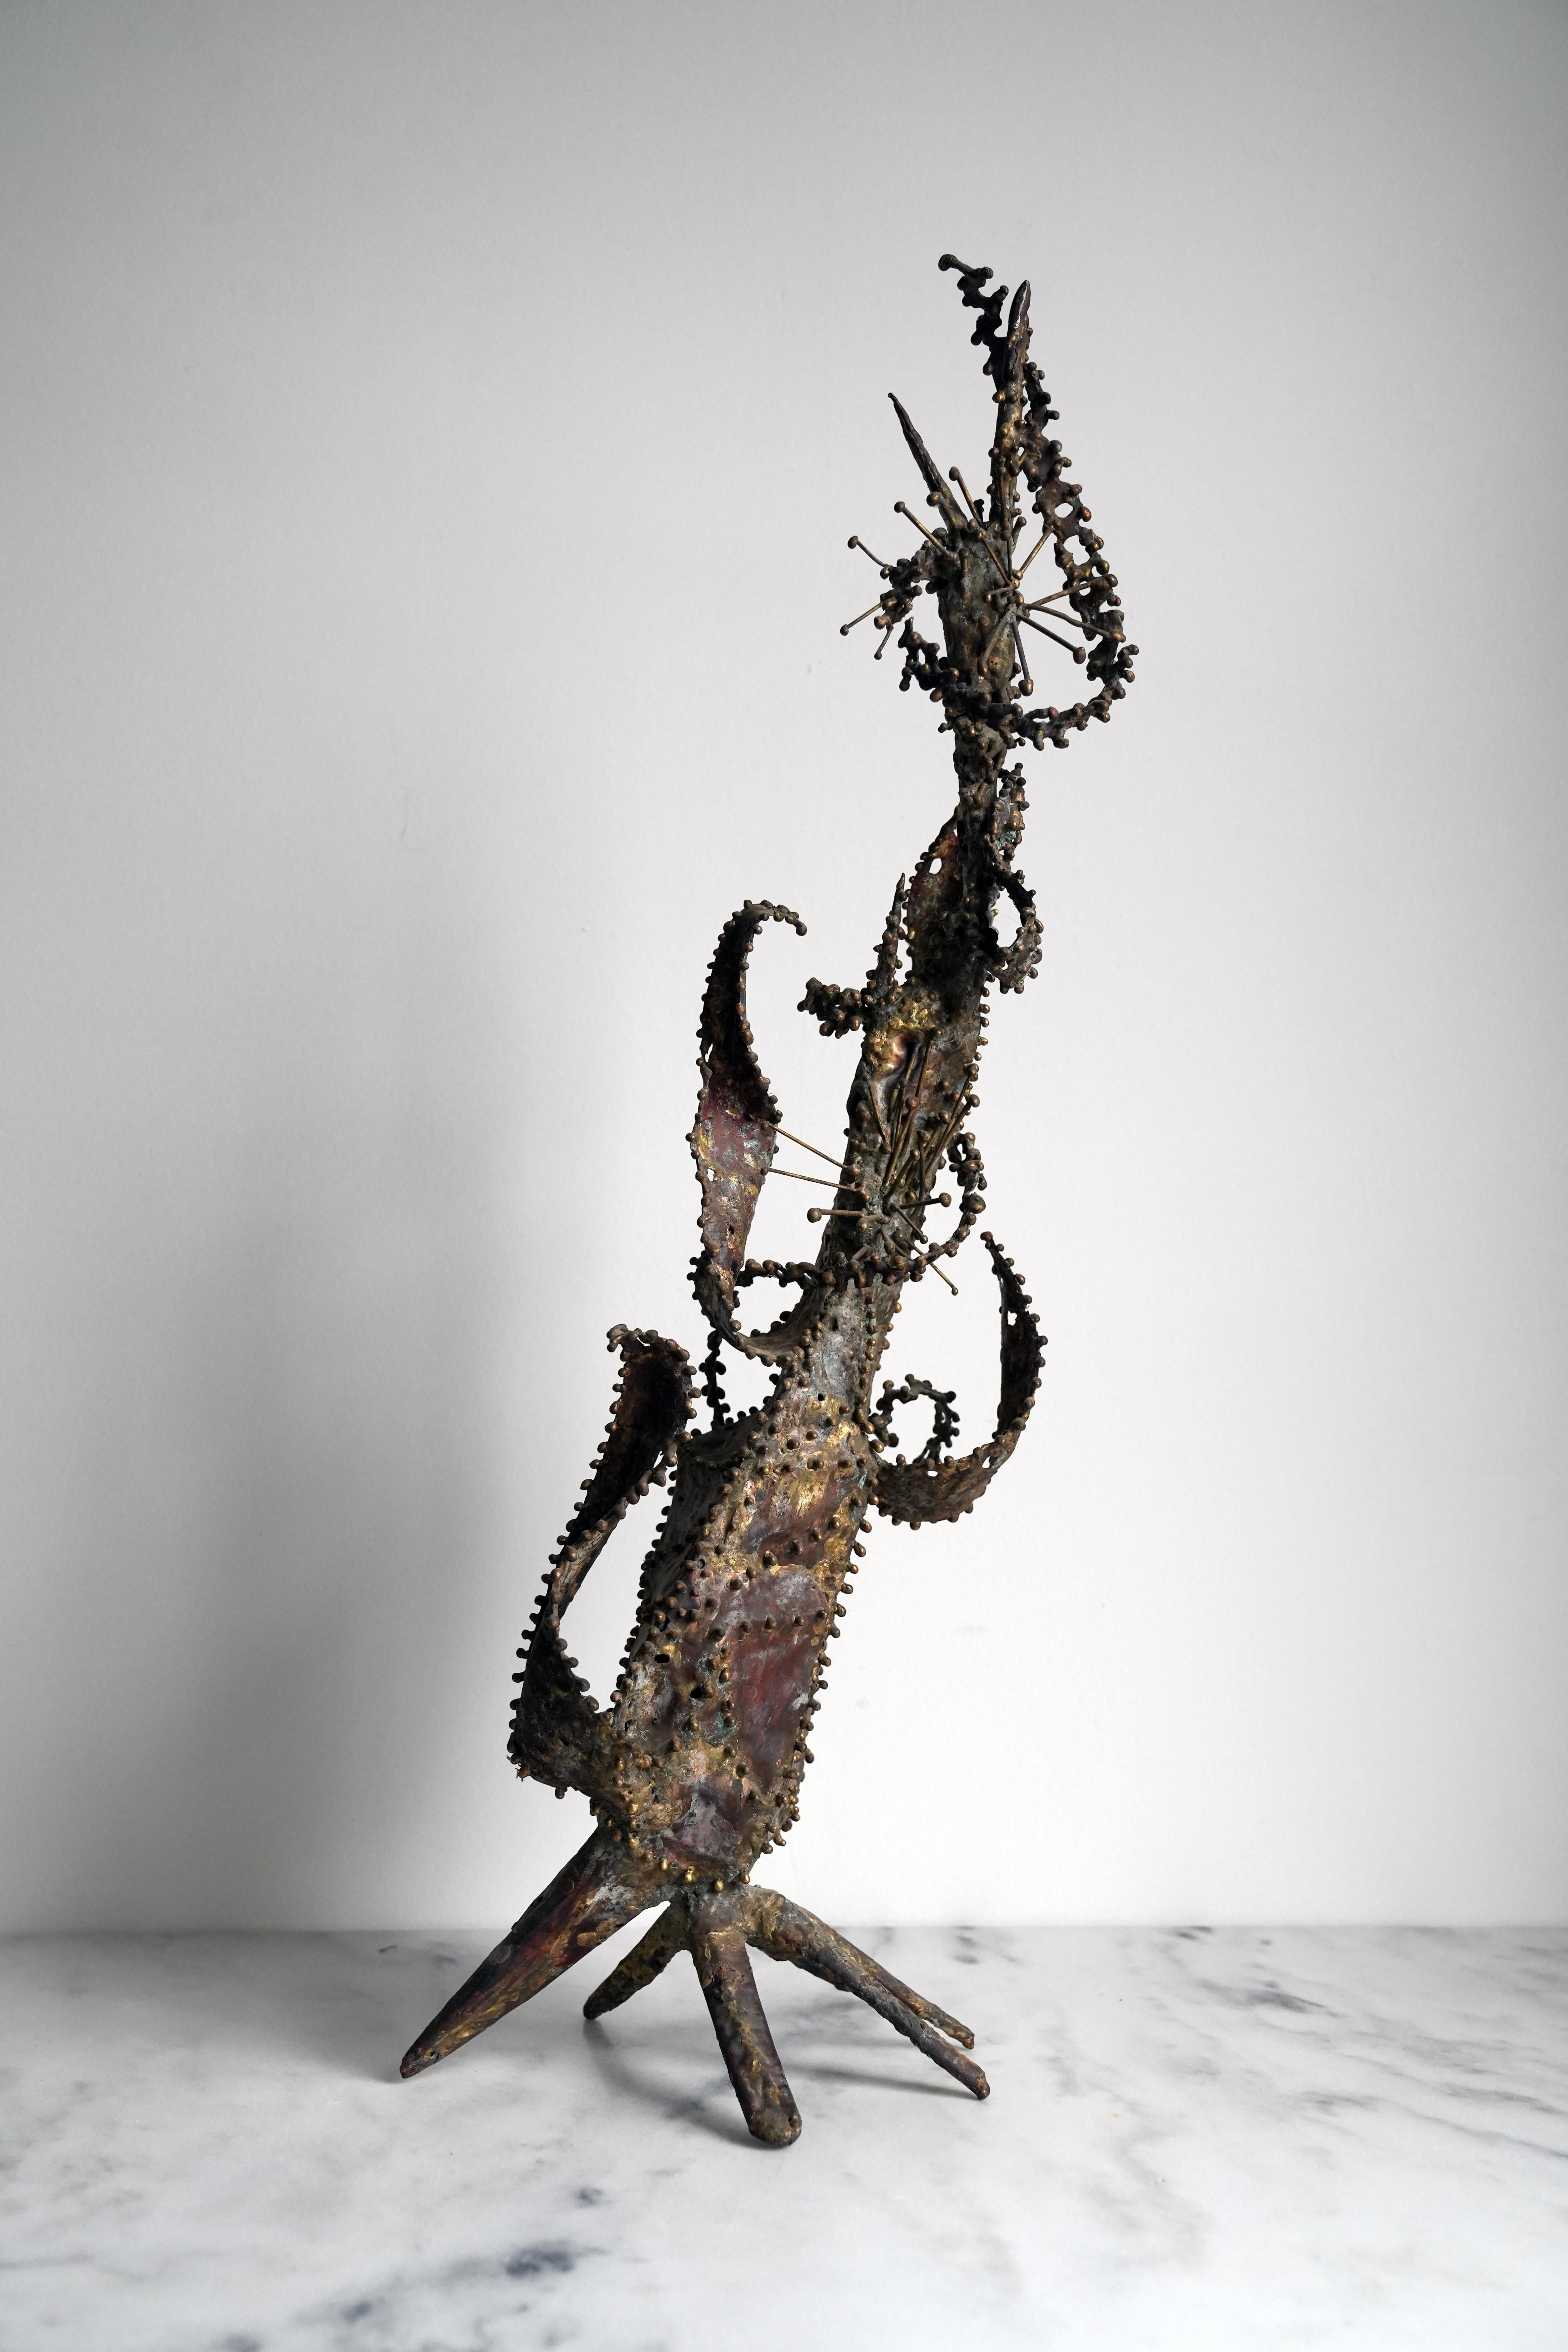 Organic Brutalist brass and copper sculpture.
Unsigned. Form reminiscent of some otherworldly plant of creature. Great color and patina. Welded mixed metals.